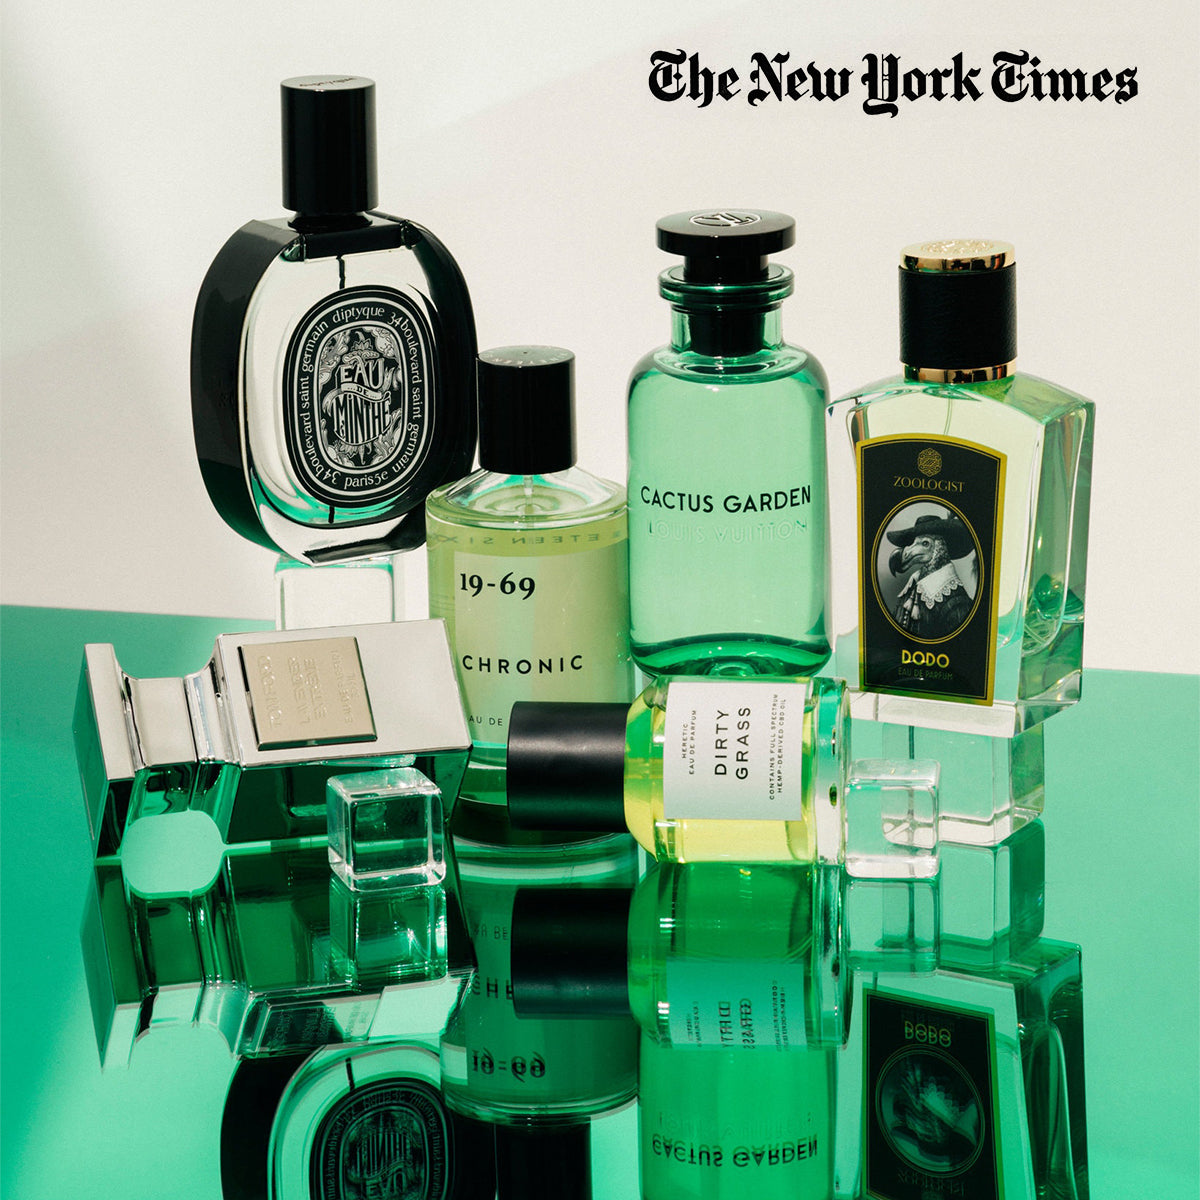 Print Press: New York Times, 18/6/2019 – "I Never Promised You an Herb Garden: 6 Green Scents for Summer"